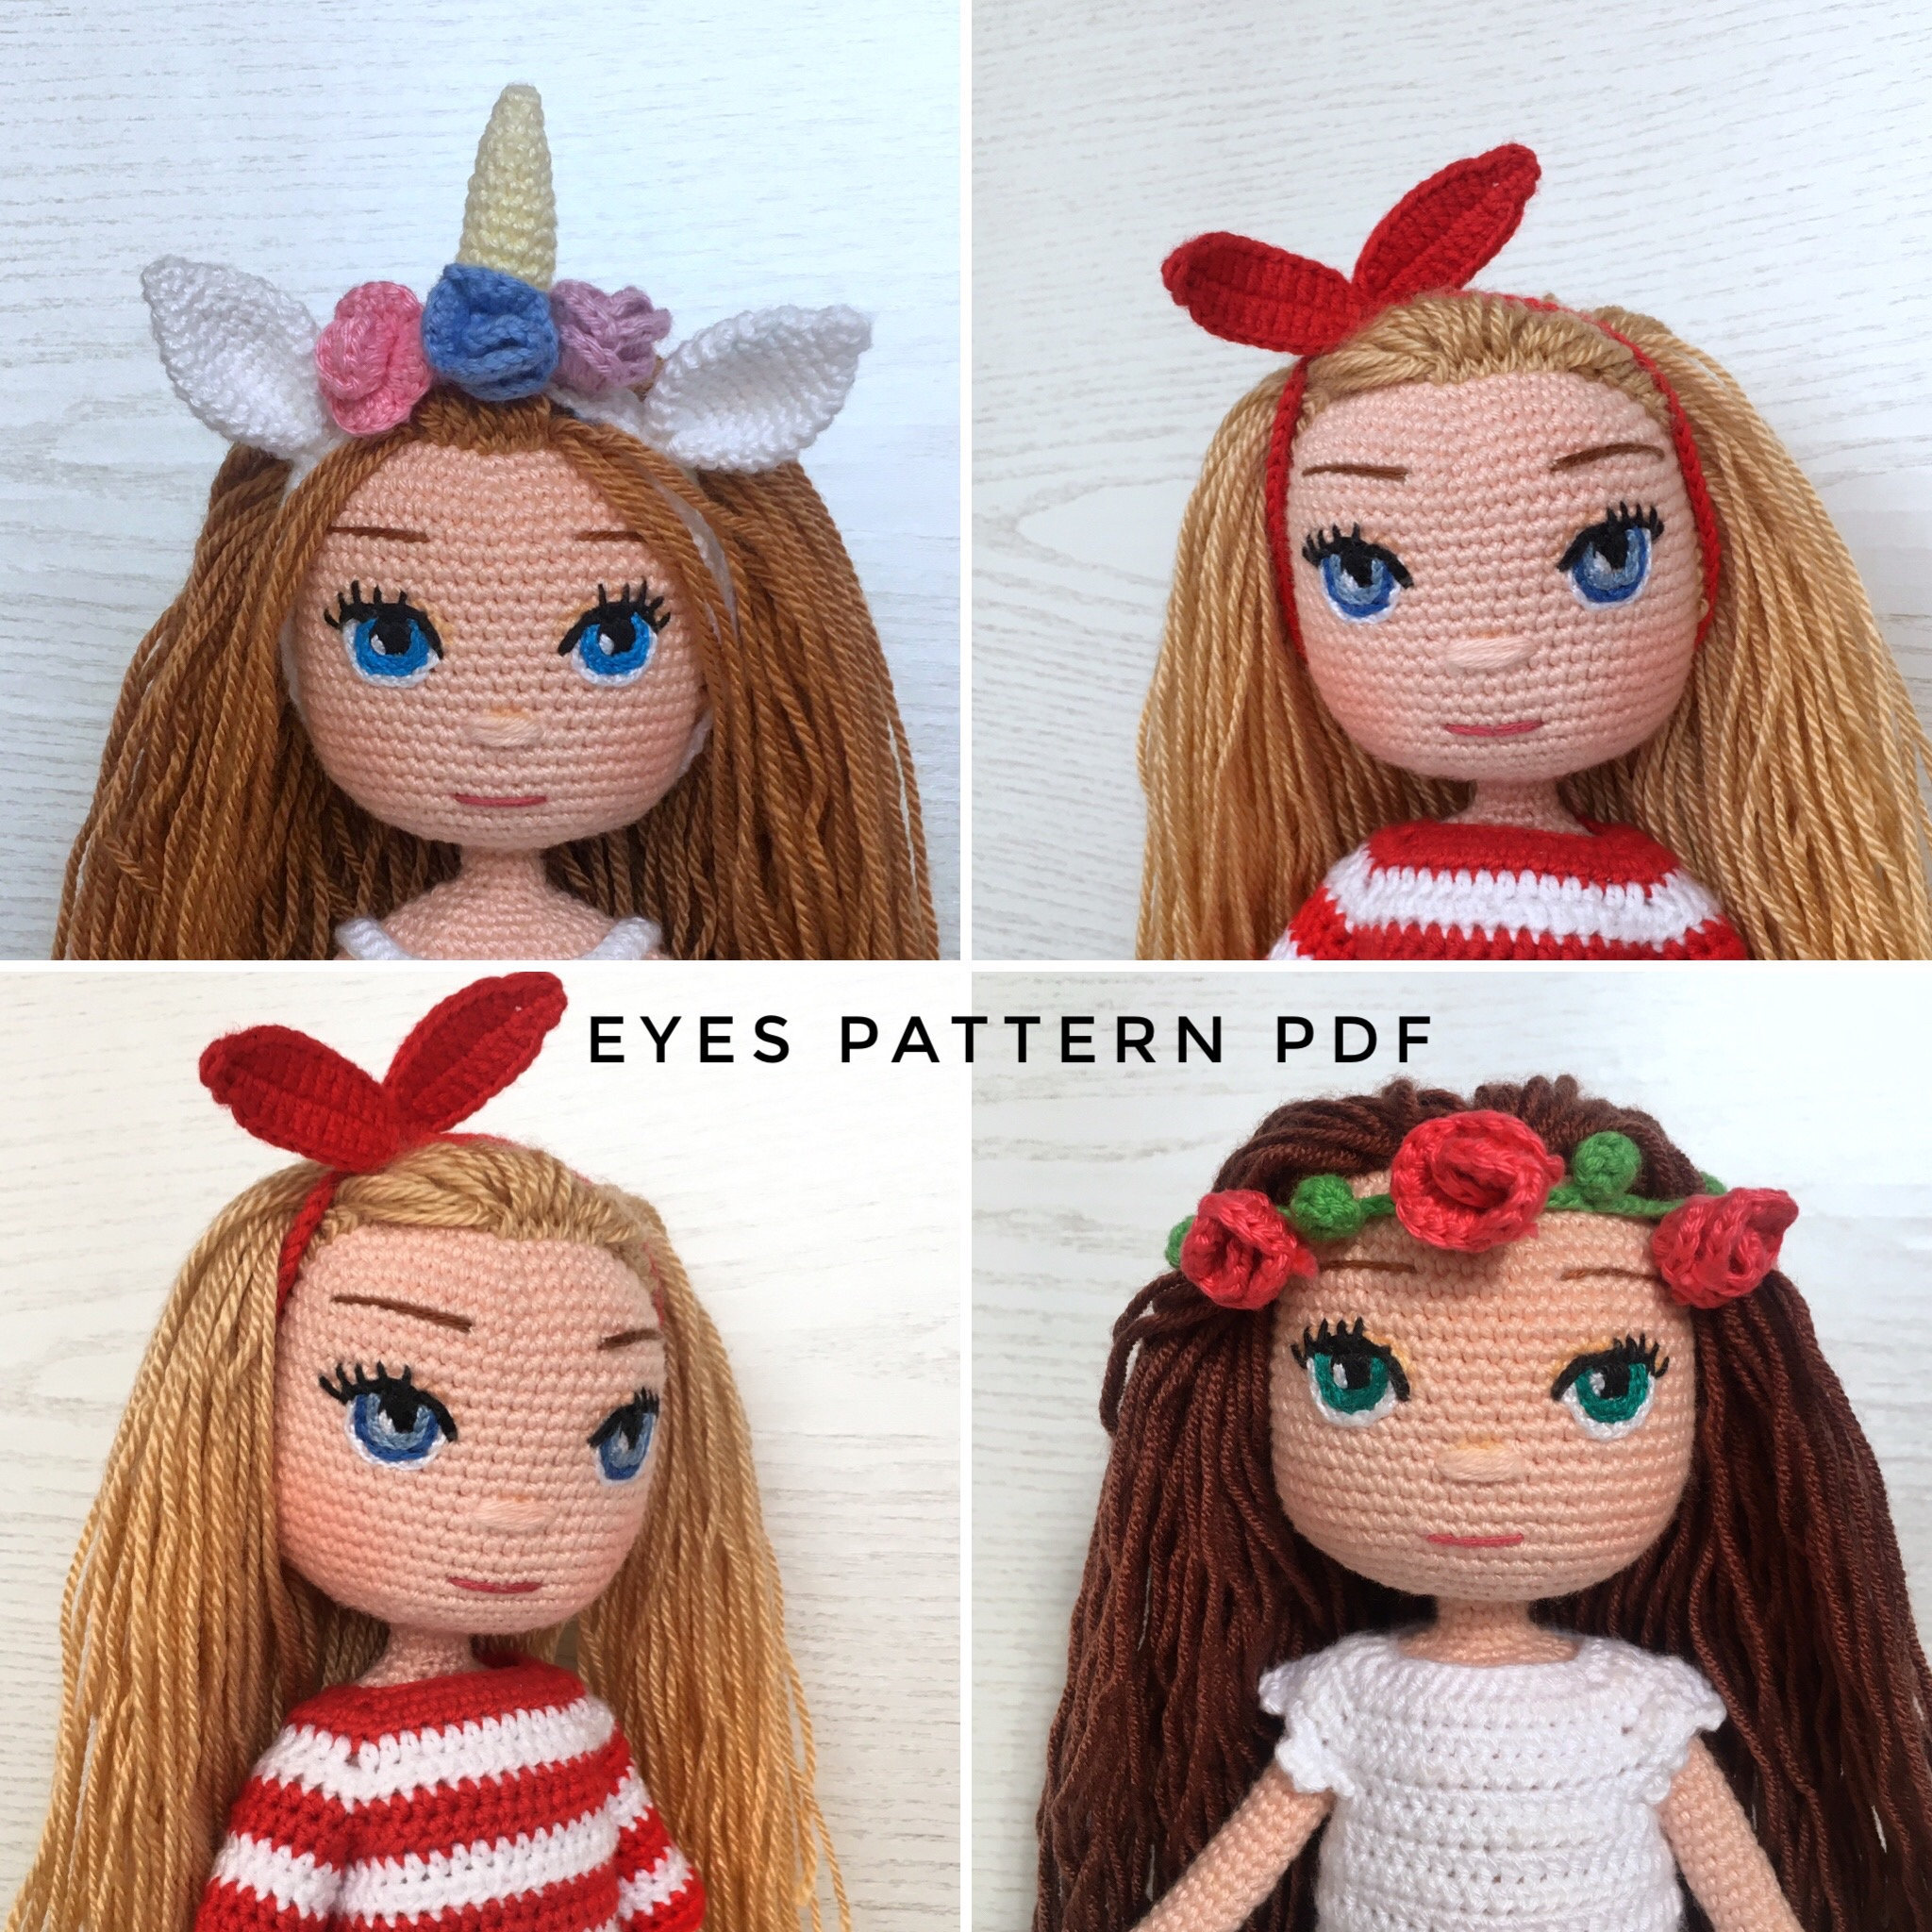 Embroidery eyes for crochet baby doll pattern PDF in English - Inspire  Uplift